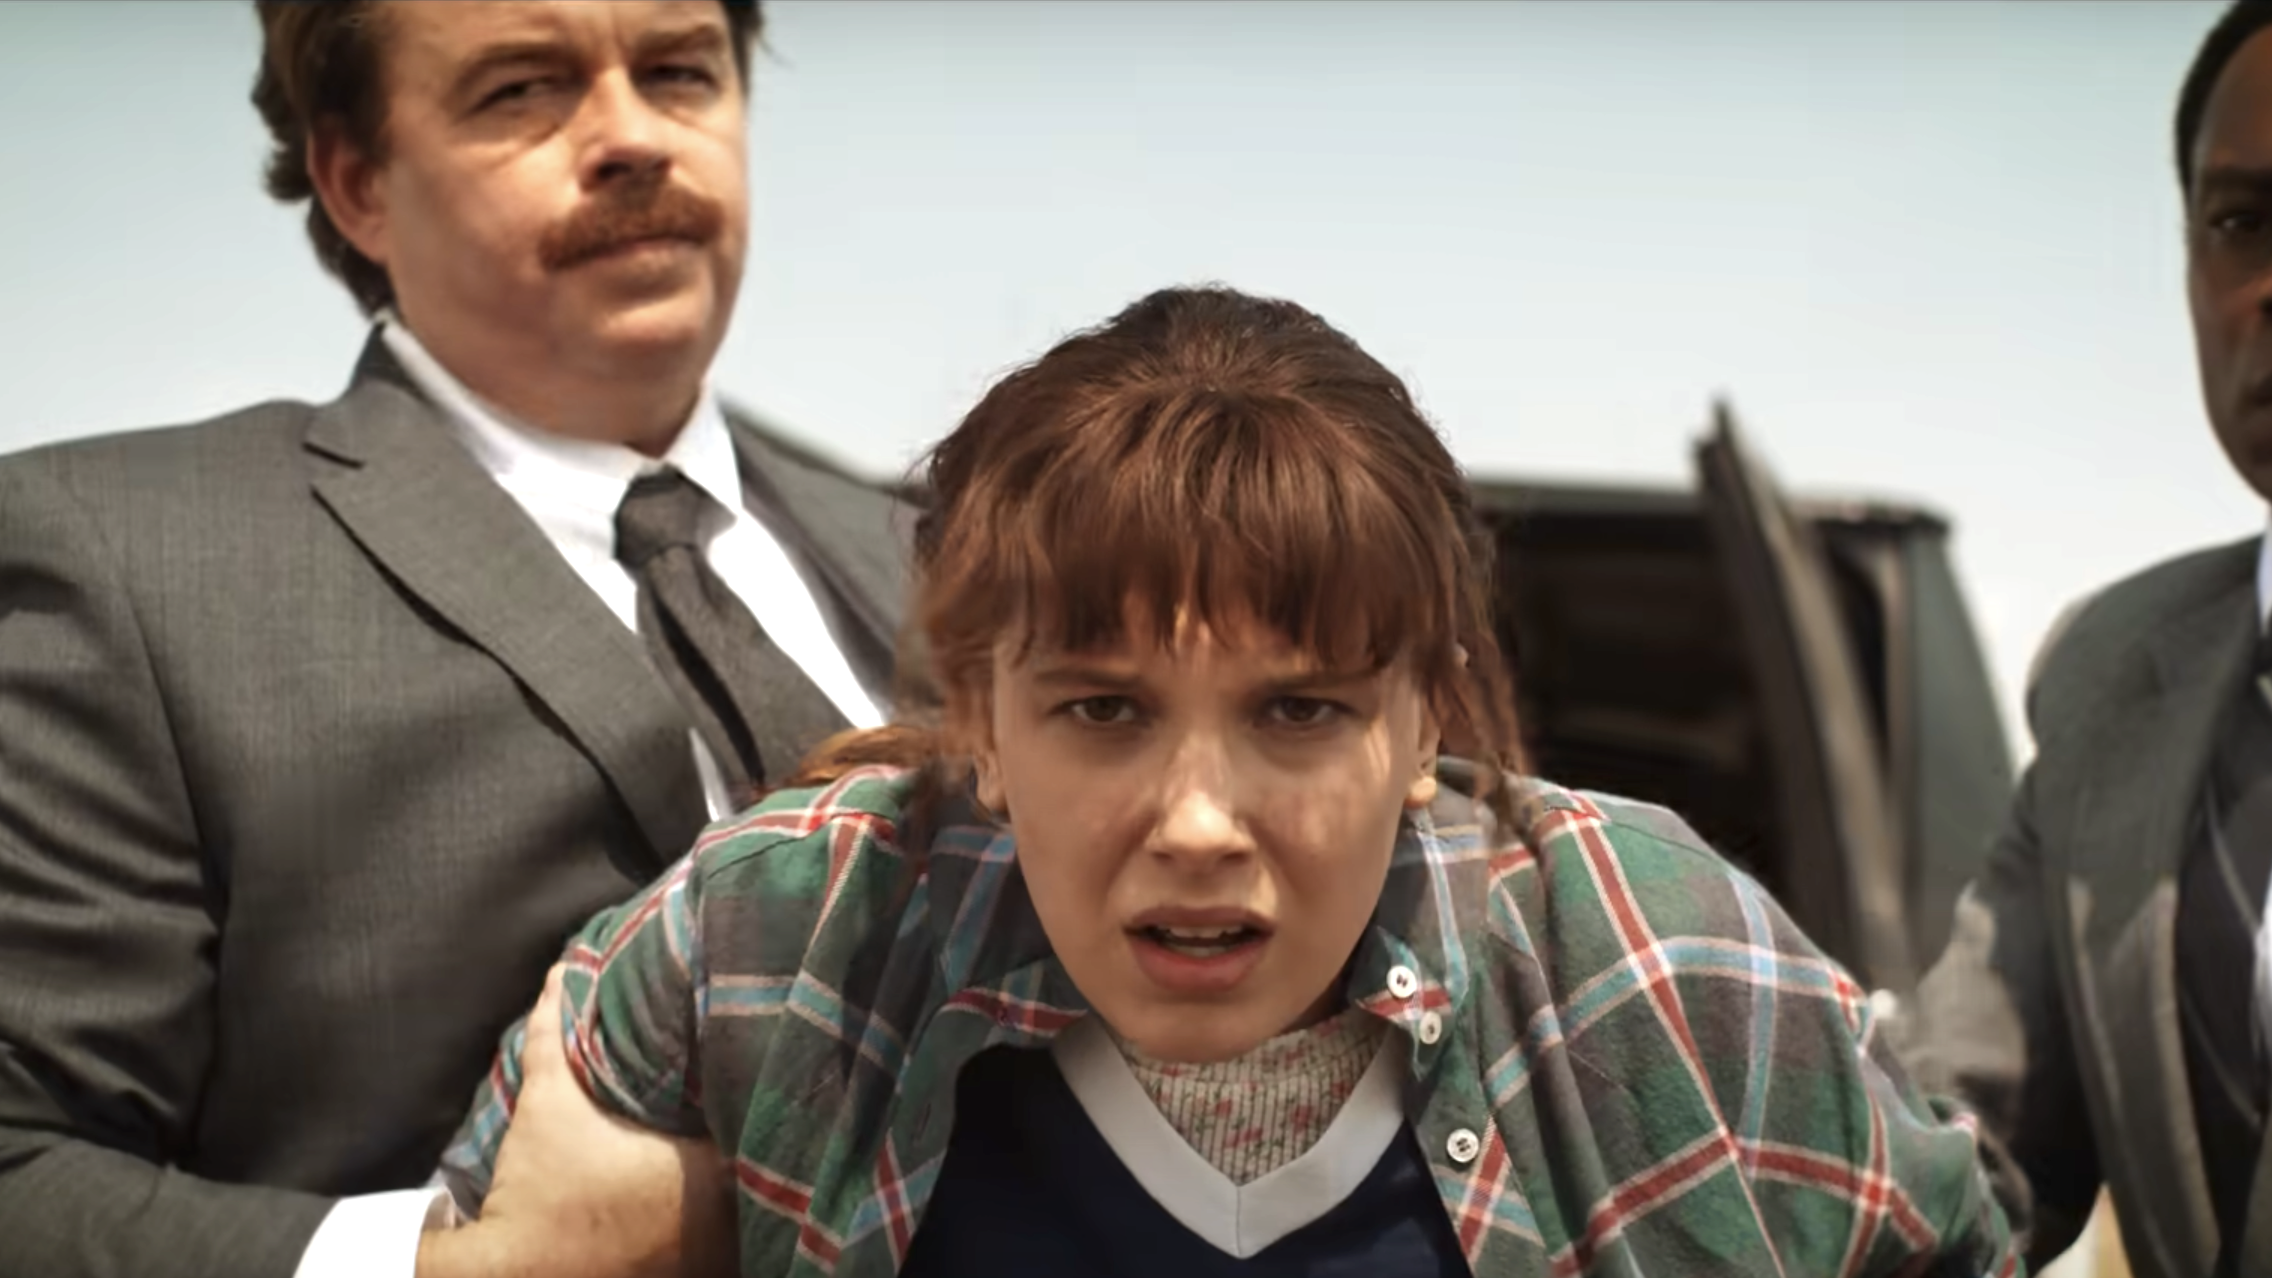 Stranger Things 4, episode 10 isn't happening but more is on the way